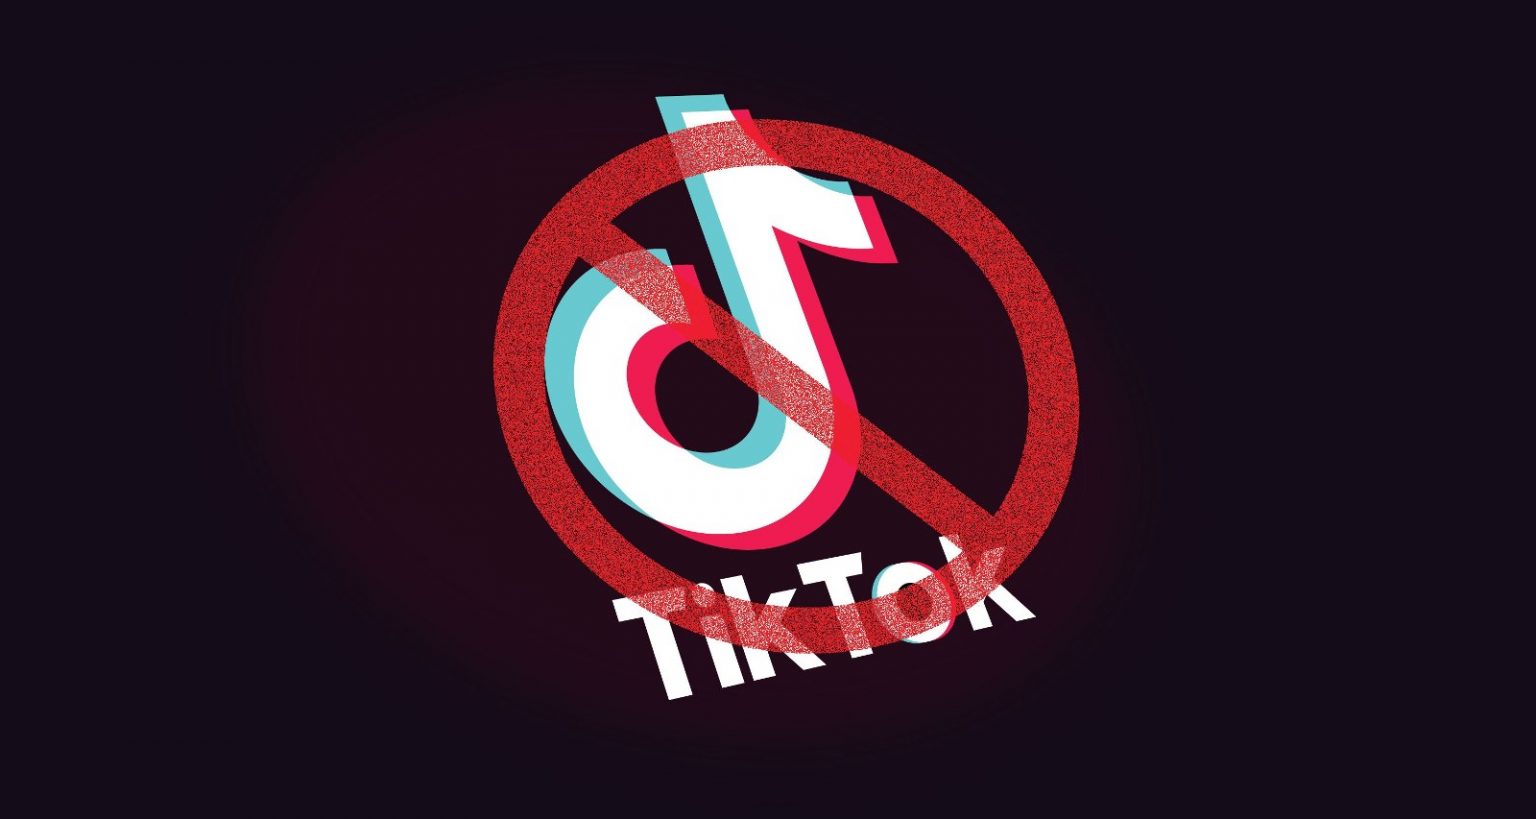 Why is the world talking over the popular mobile app TikTok ban?